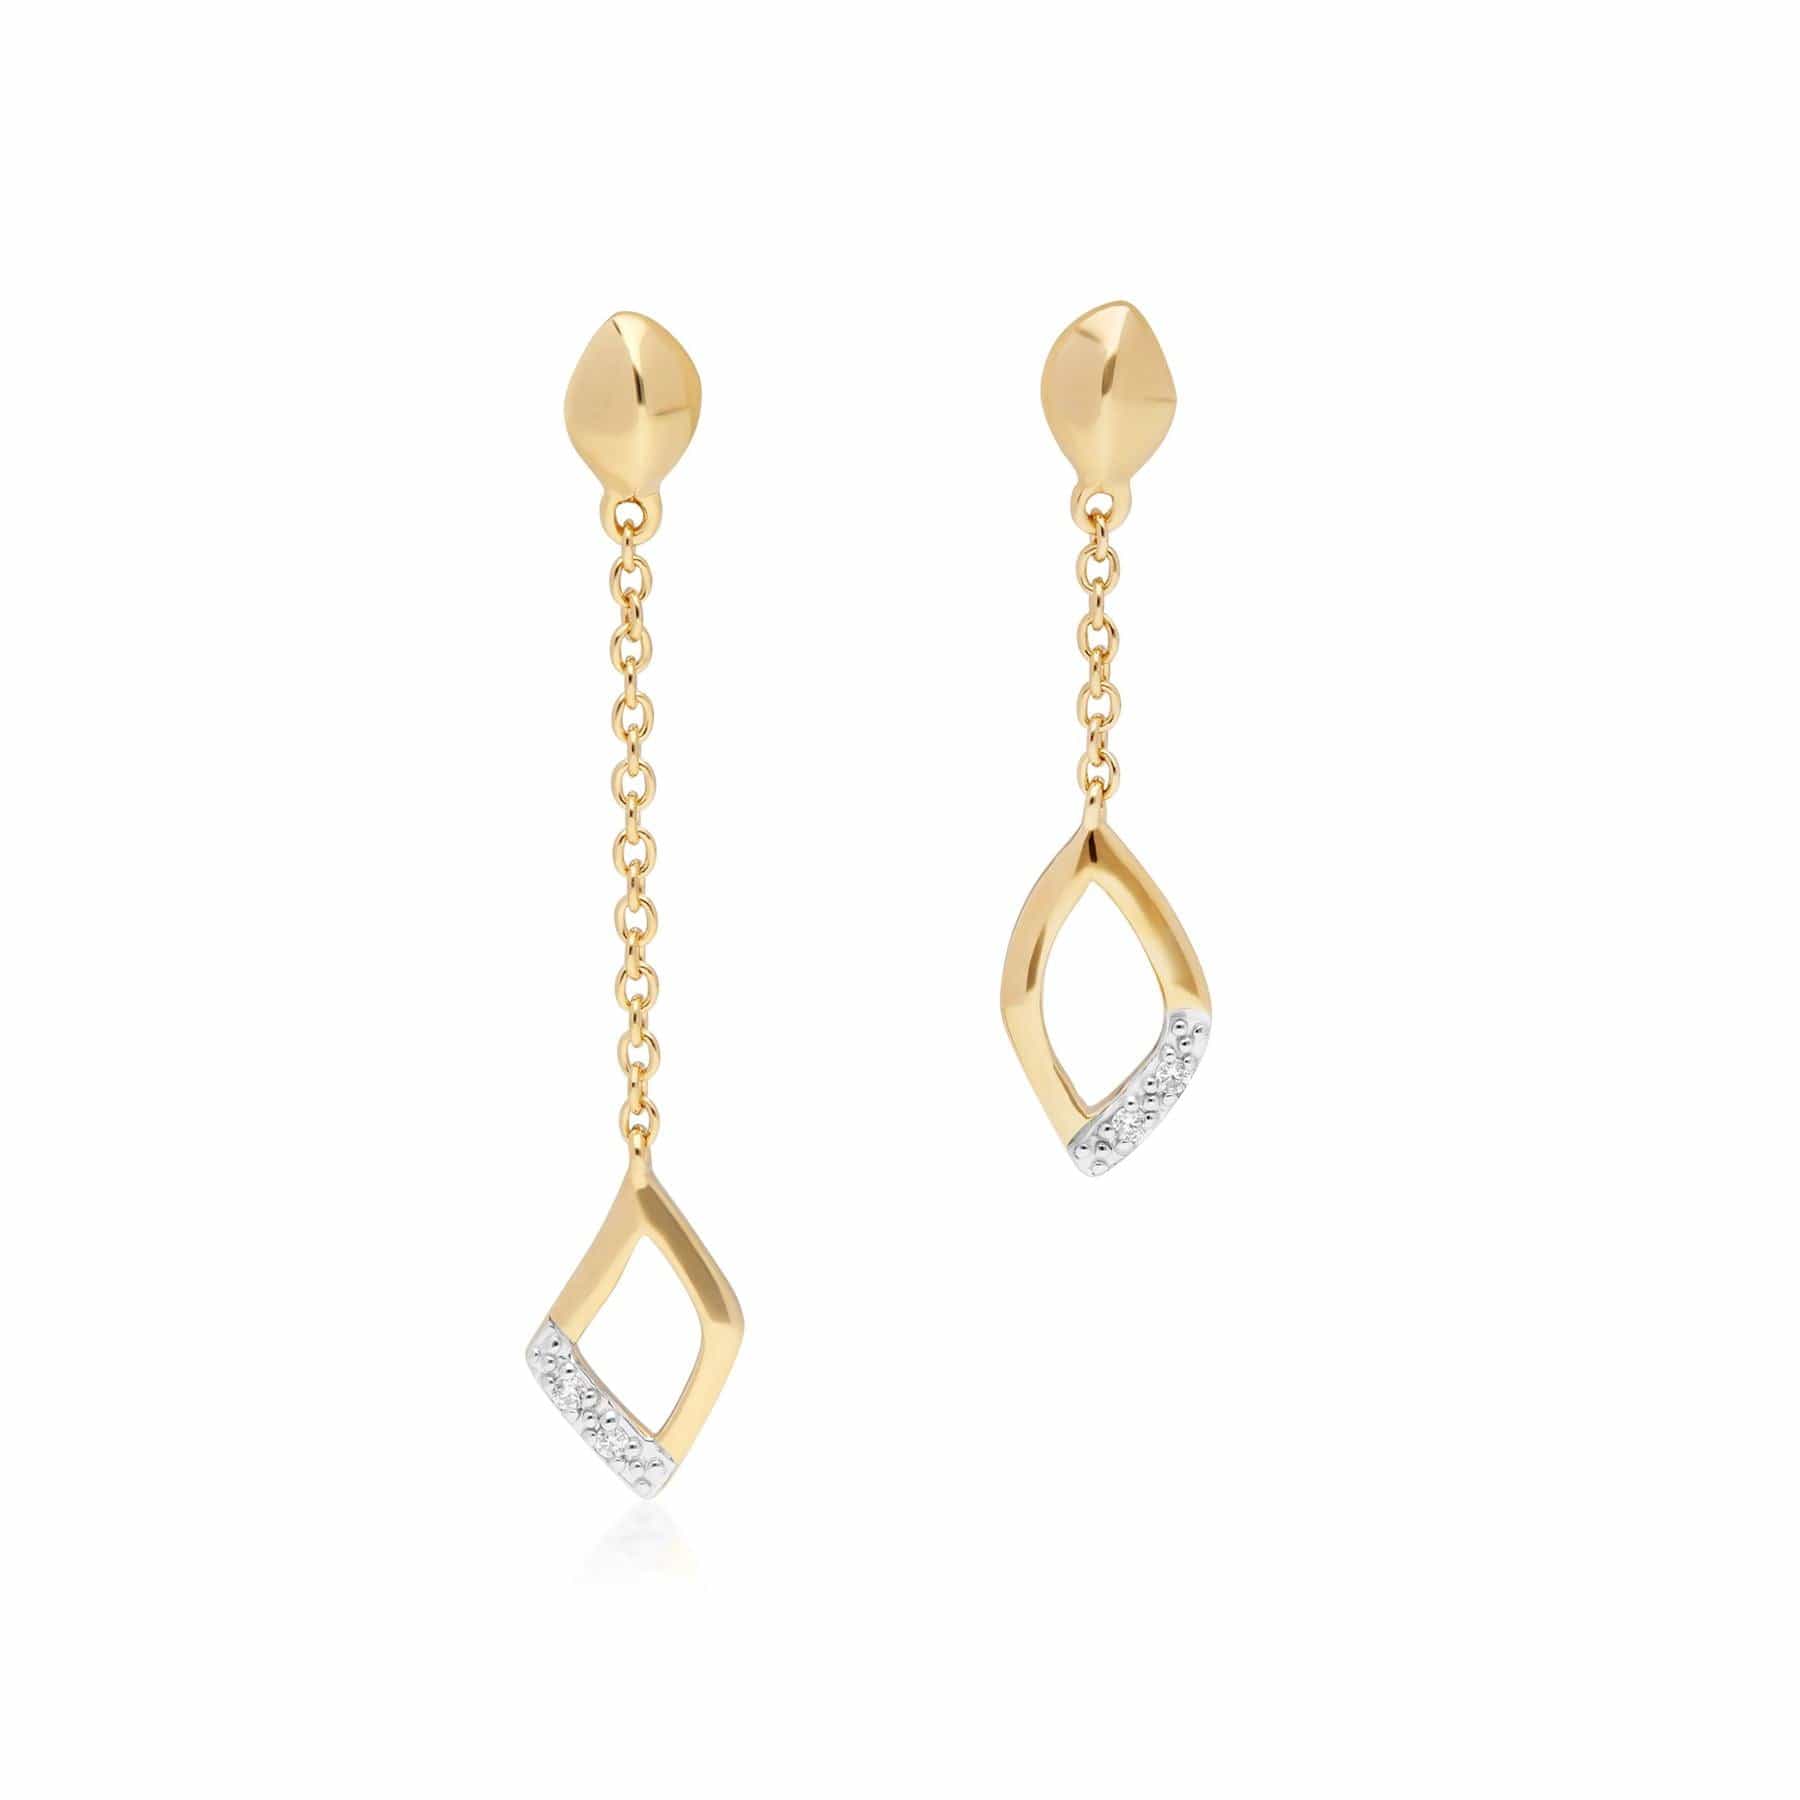 Image of Mismatched Diamond Dangle Drop Earrings in 9ct Yellow Gold